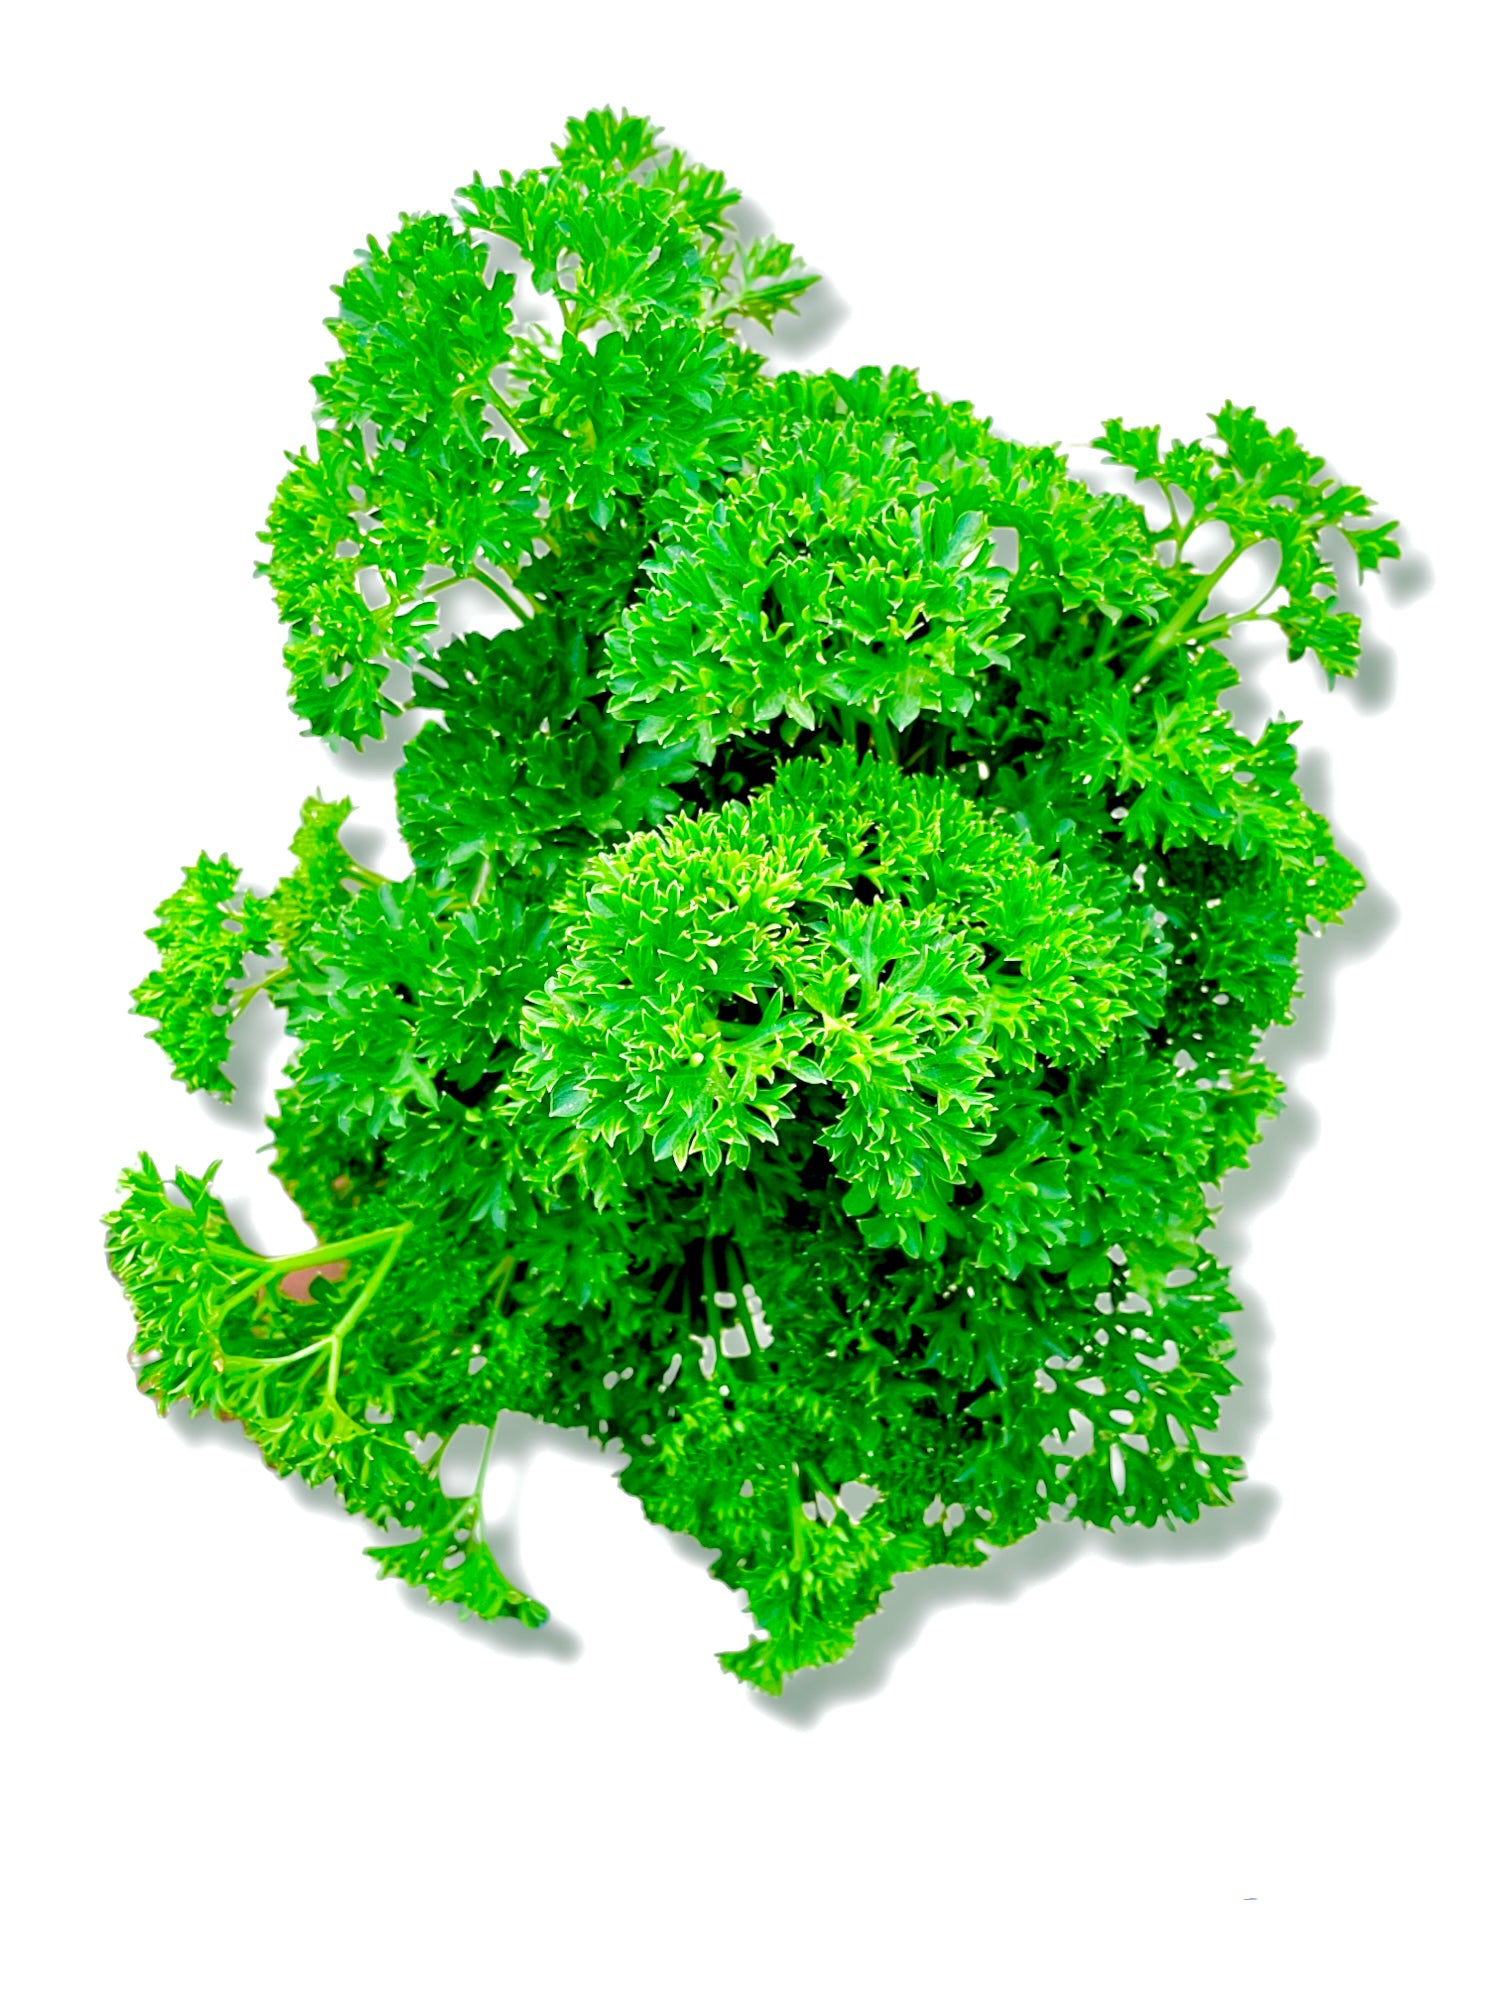 Hydroponic Parsley (Packed with vitamins A, K, and C)